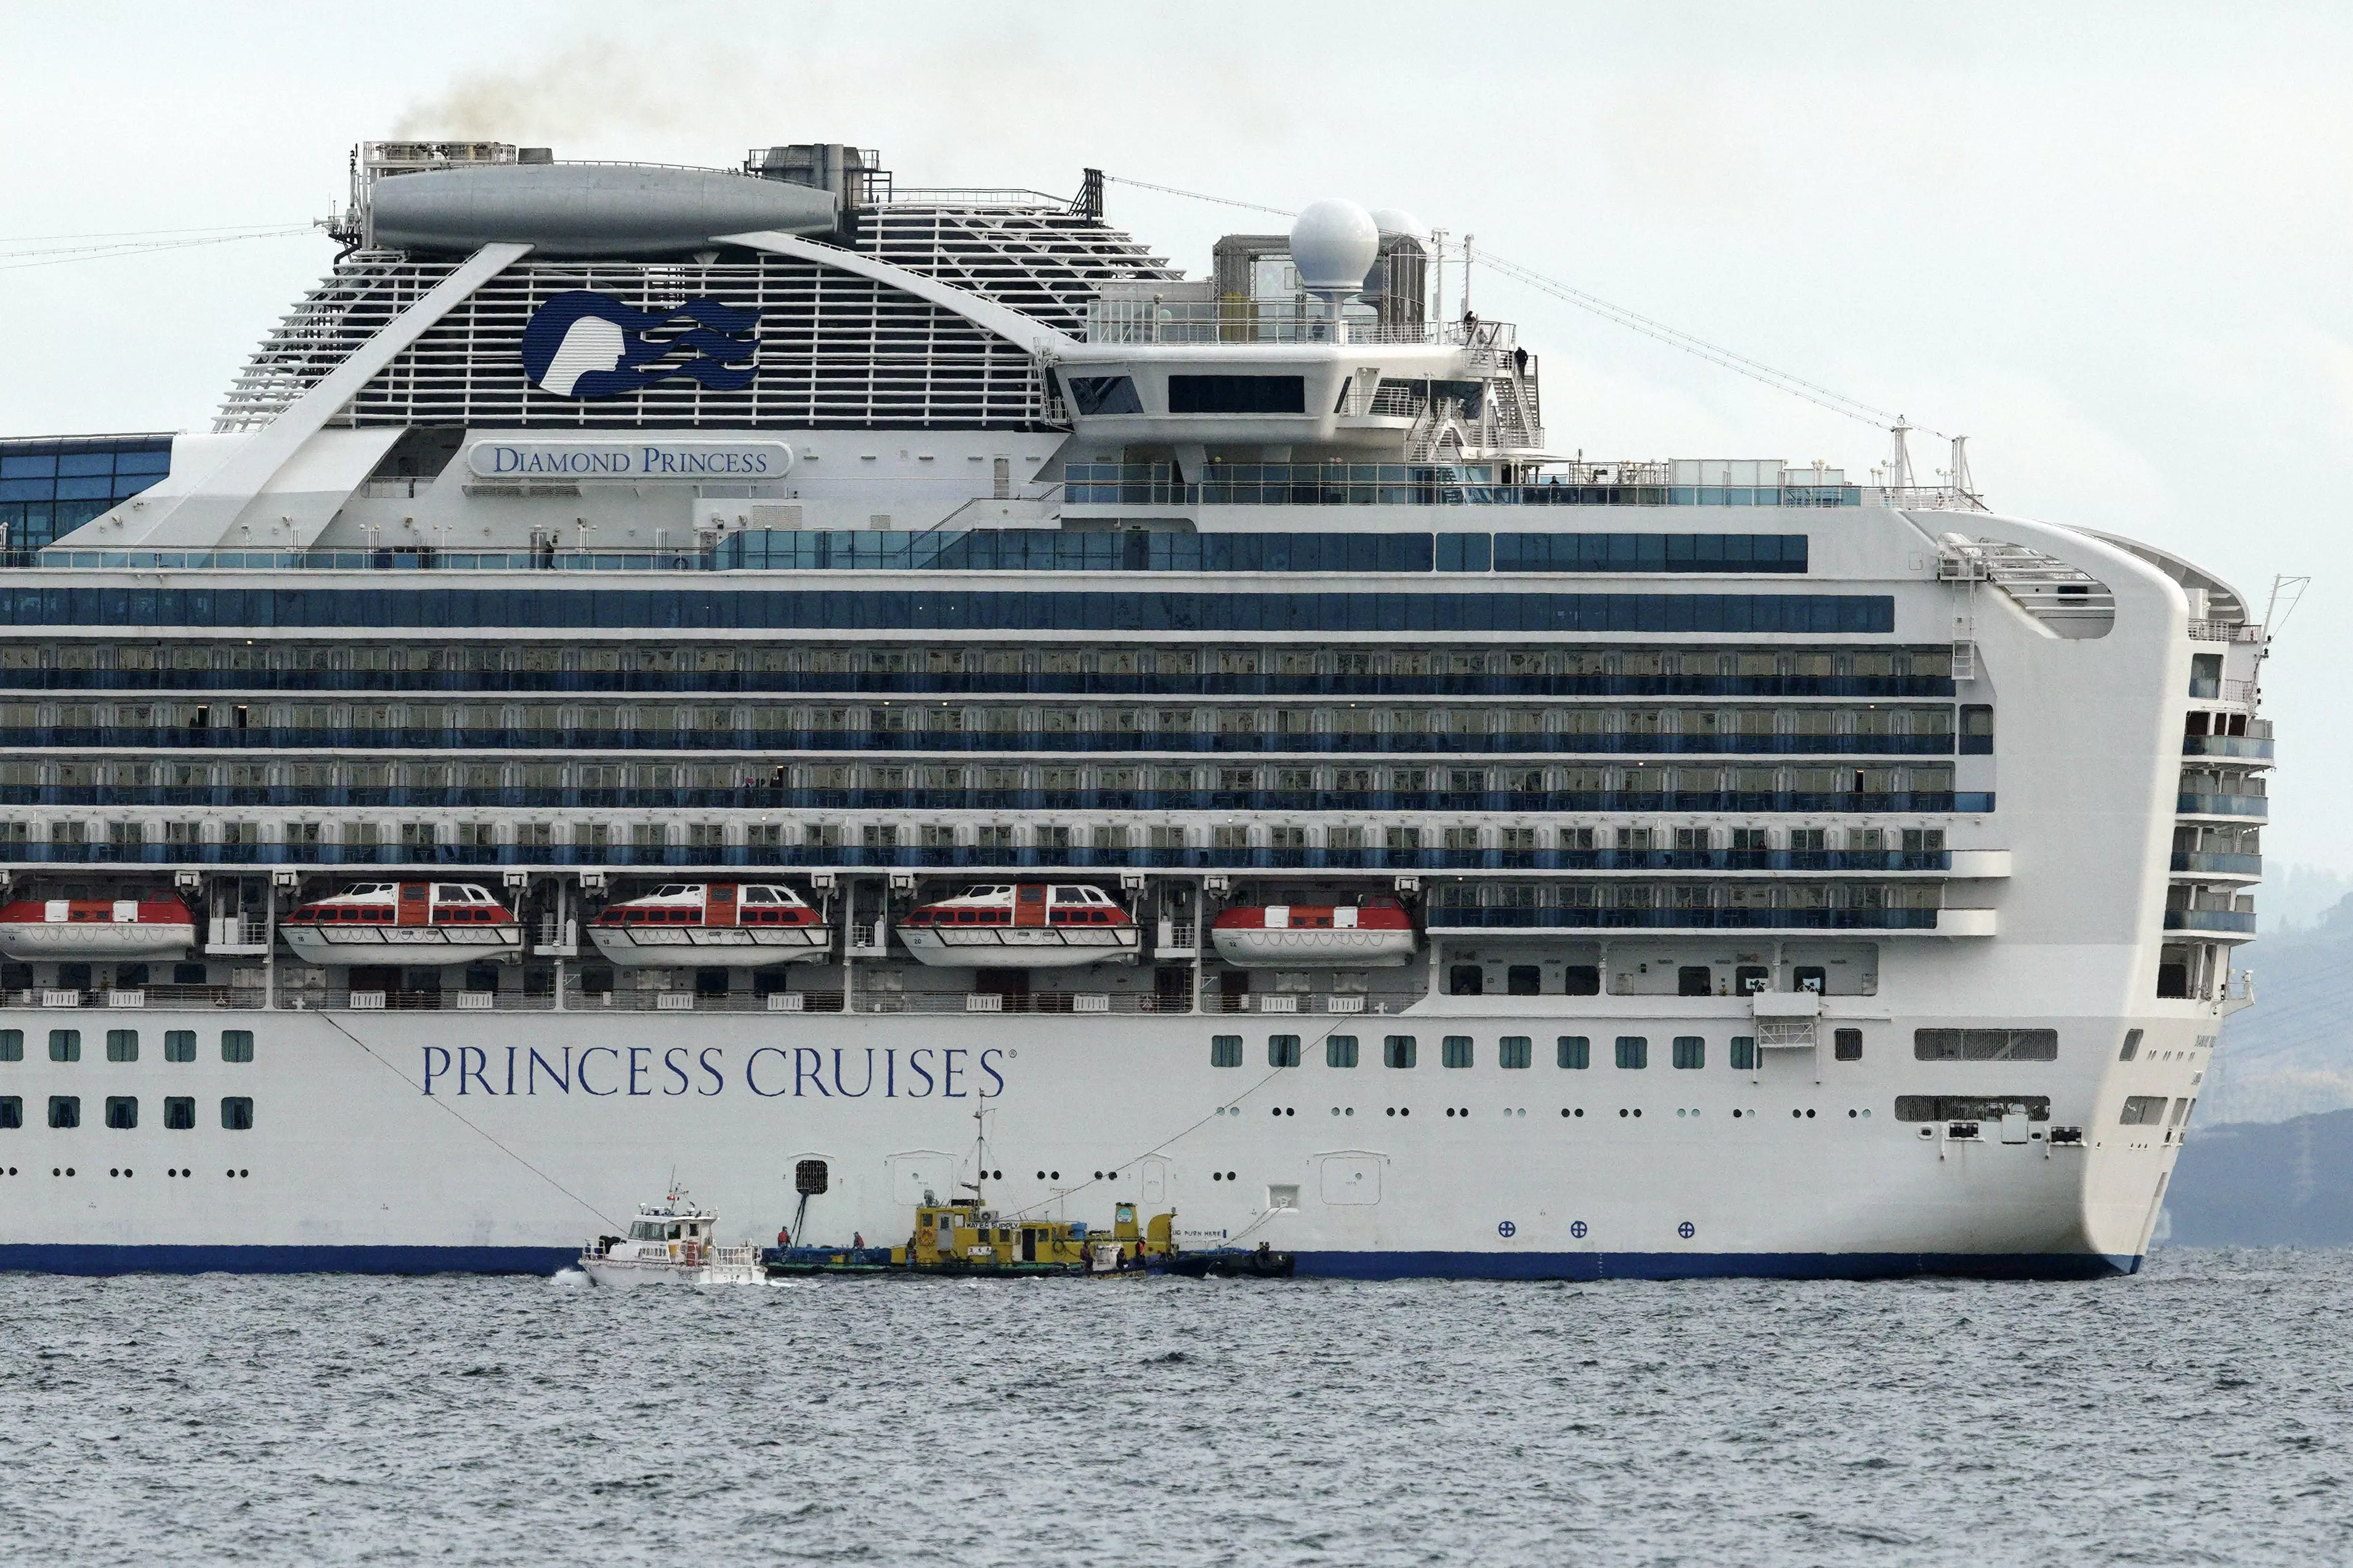 Ten people have tested positive for the virus on board the ship.